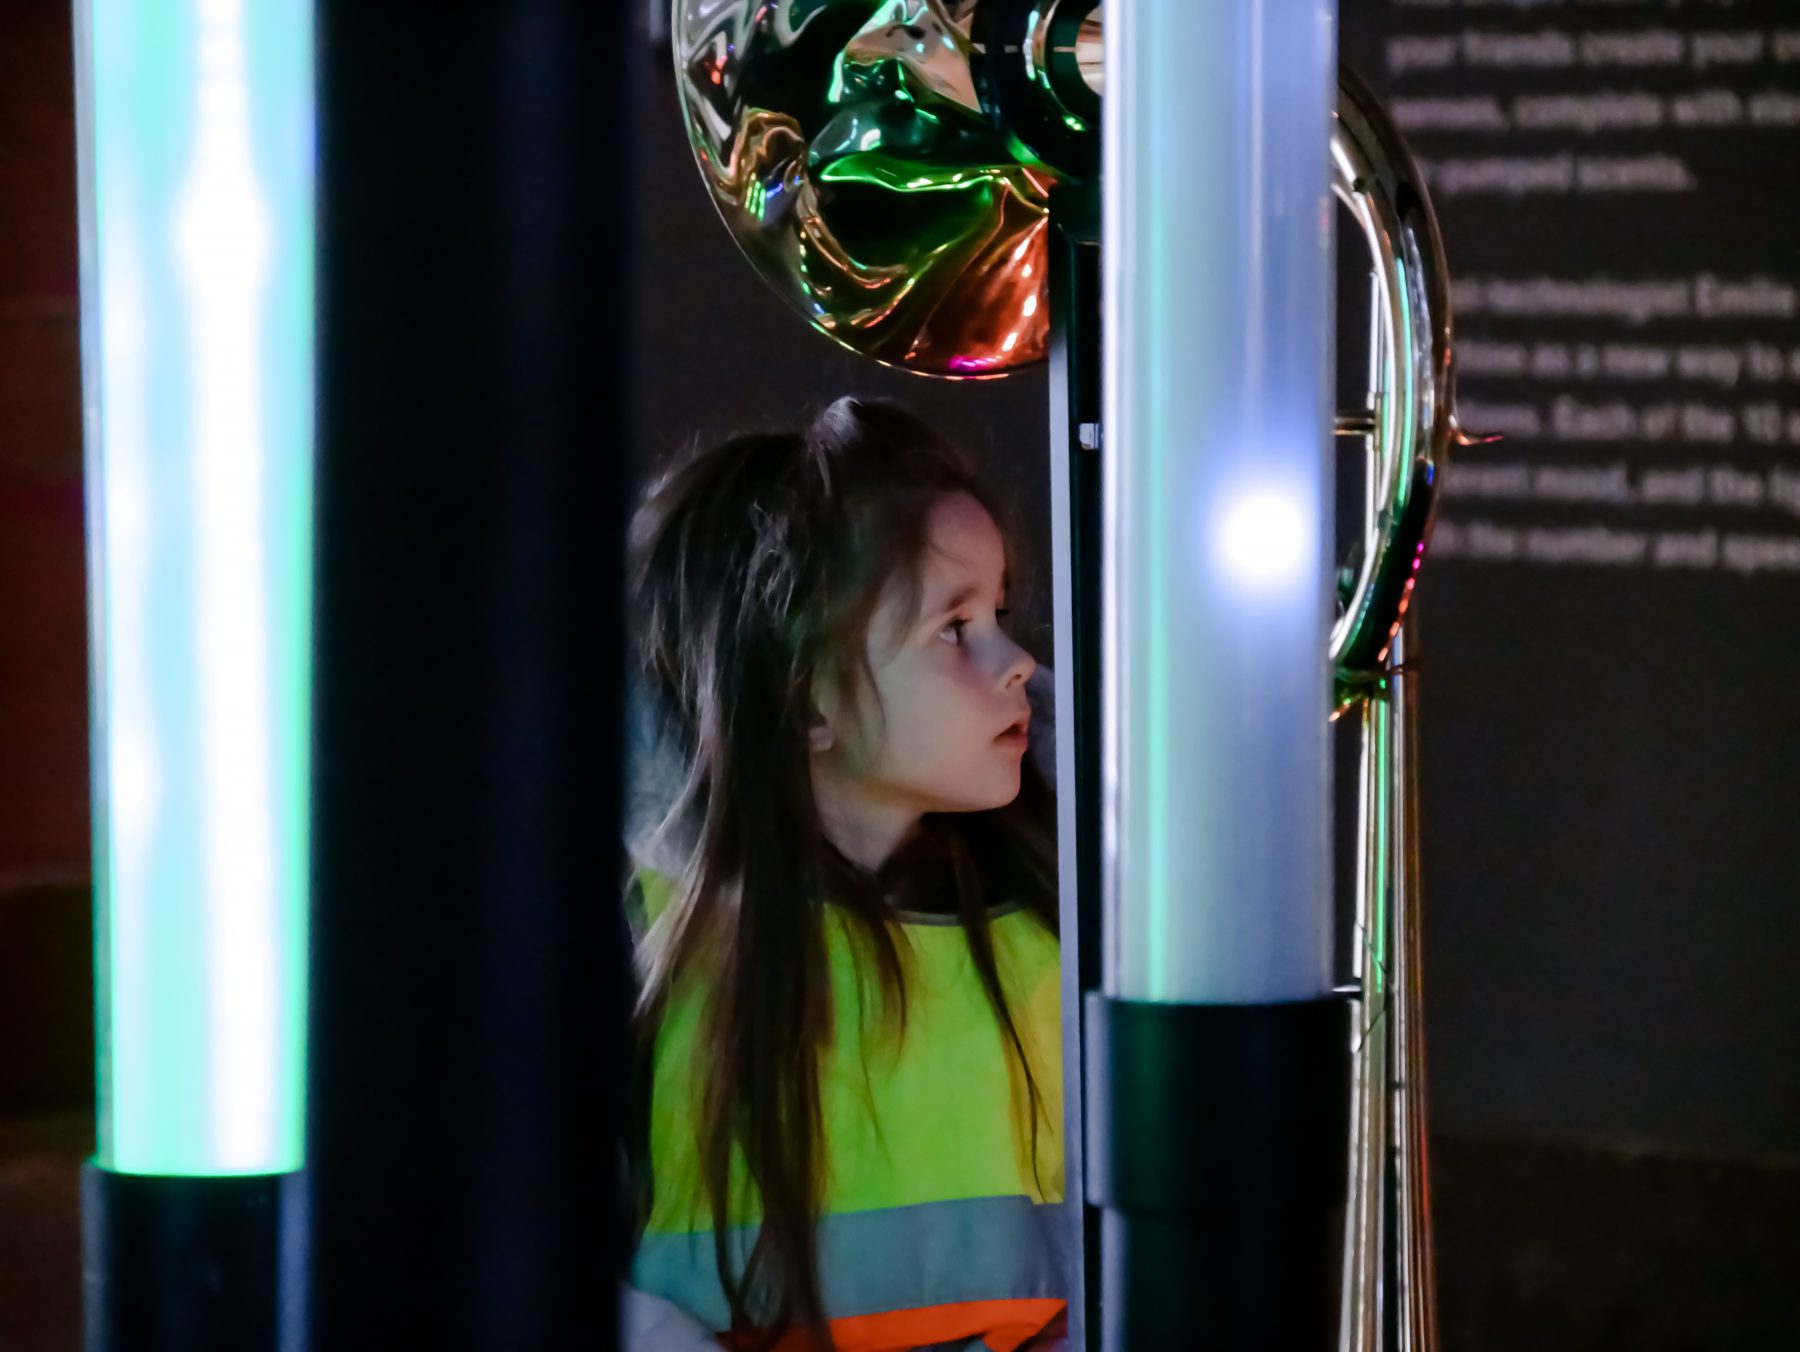 A girl visiting the science center